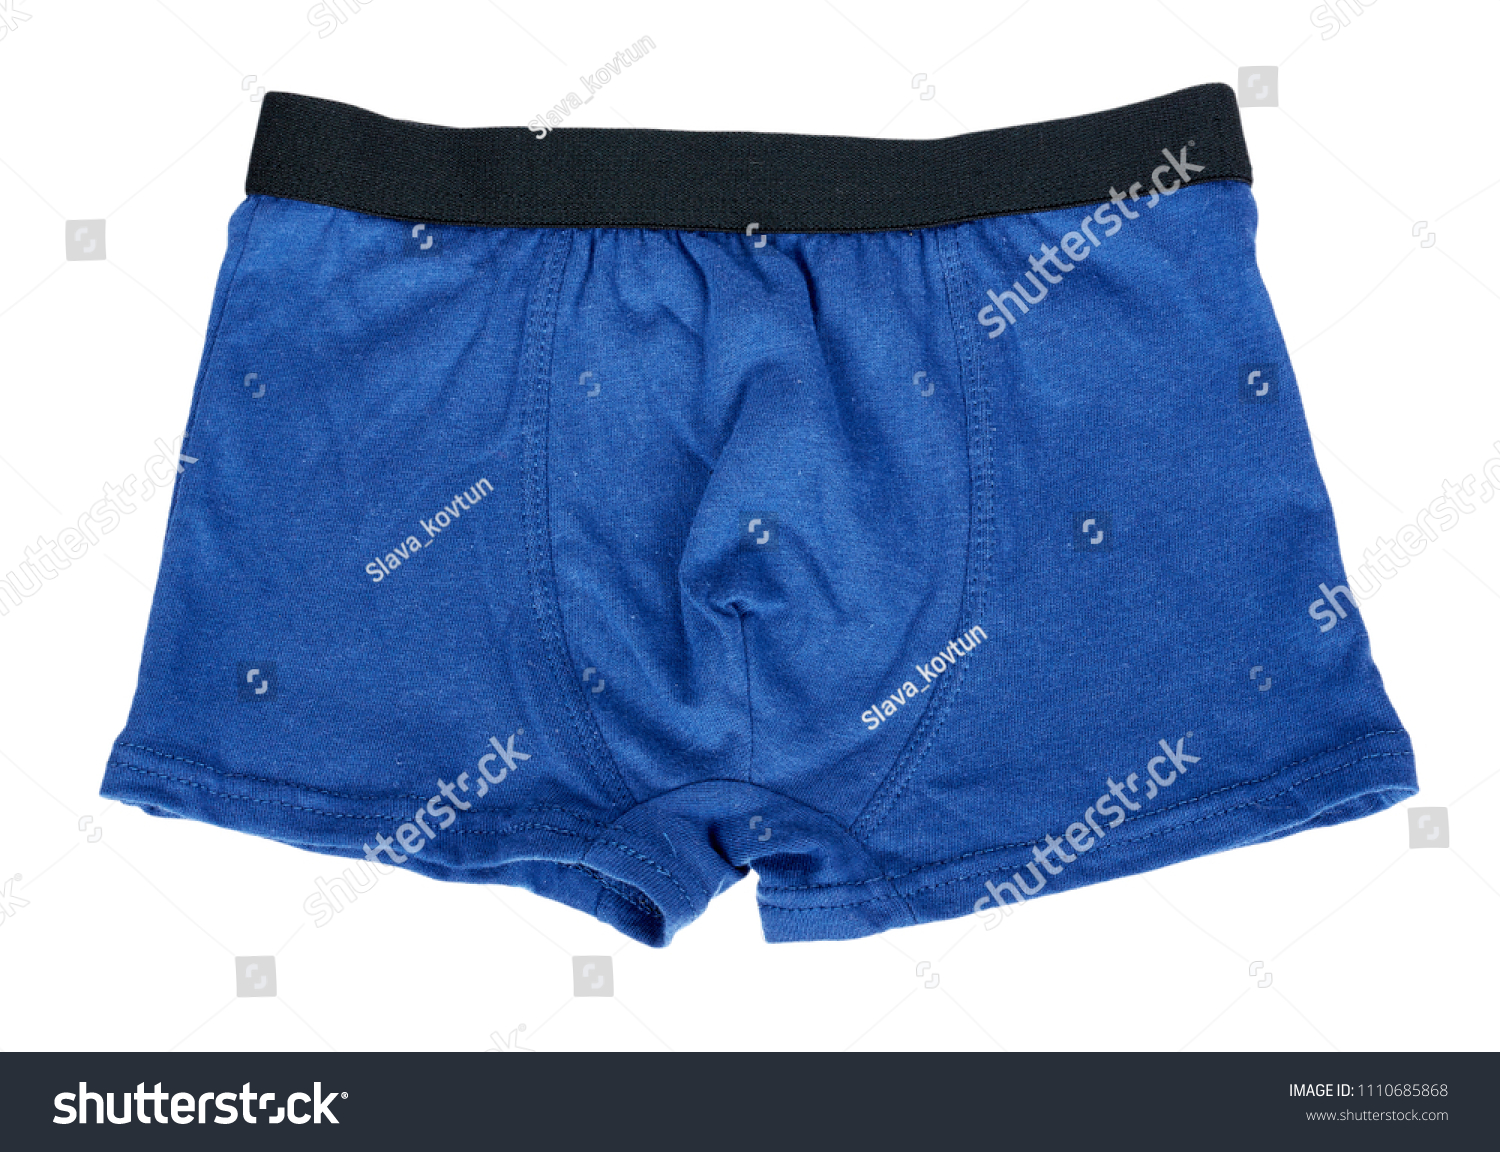 Underpants and clothing for kids isolated on white background. #1110685868